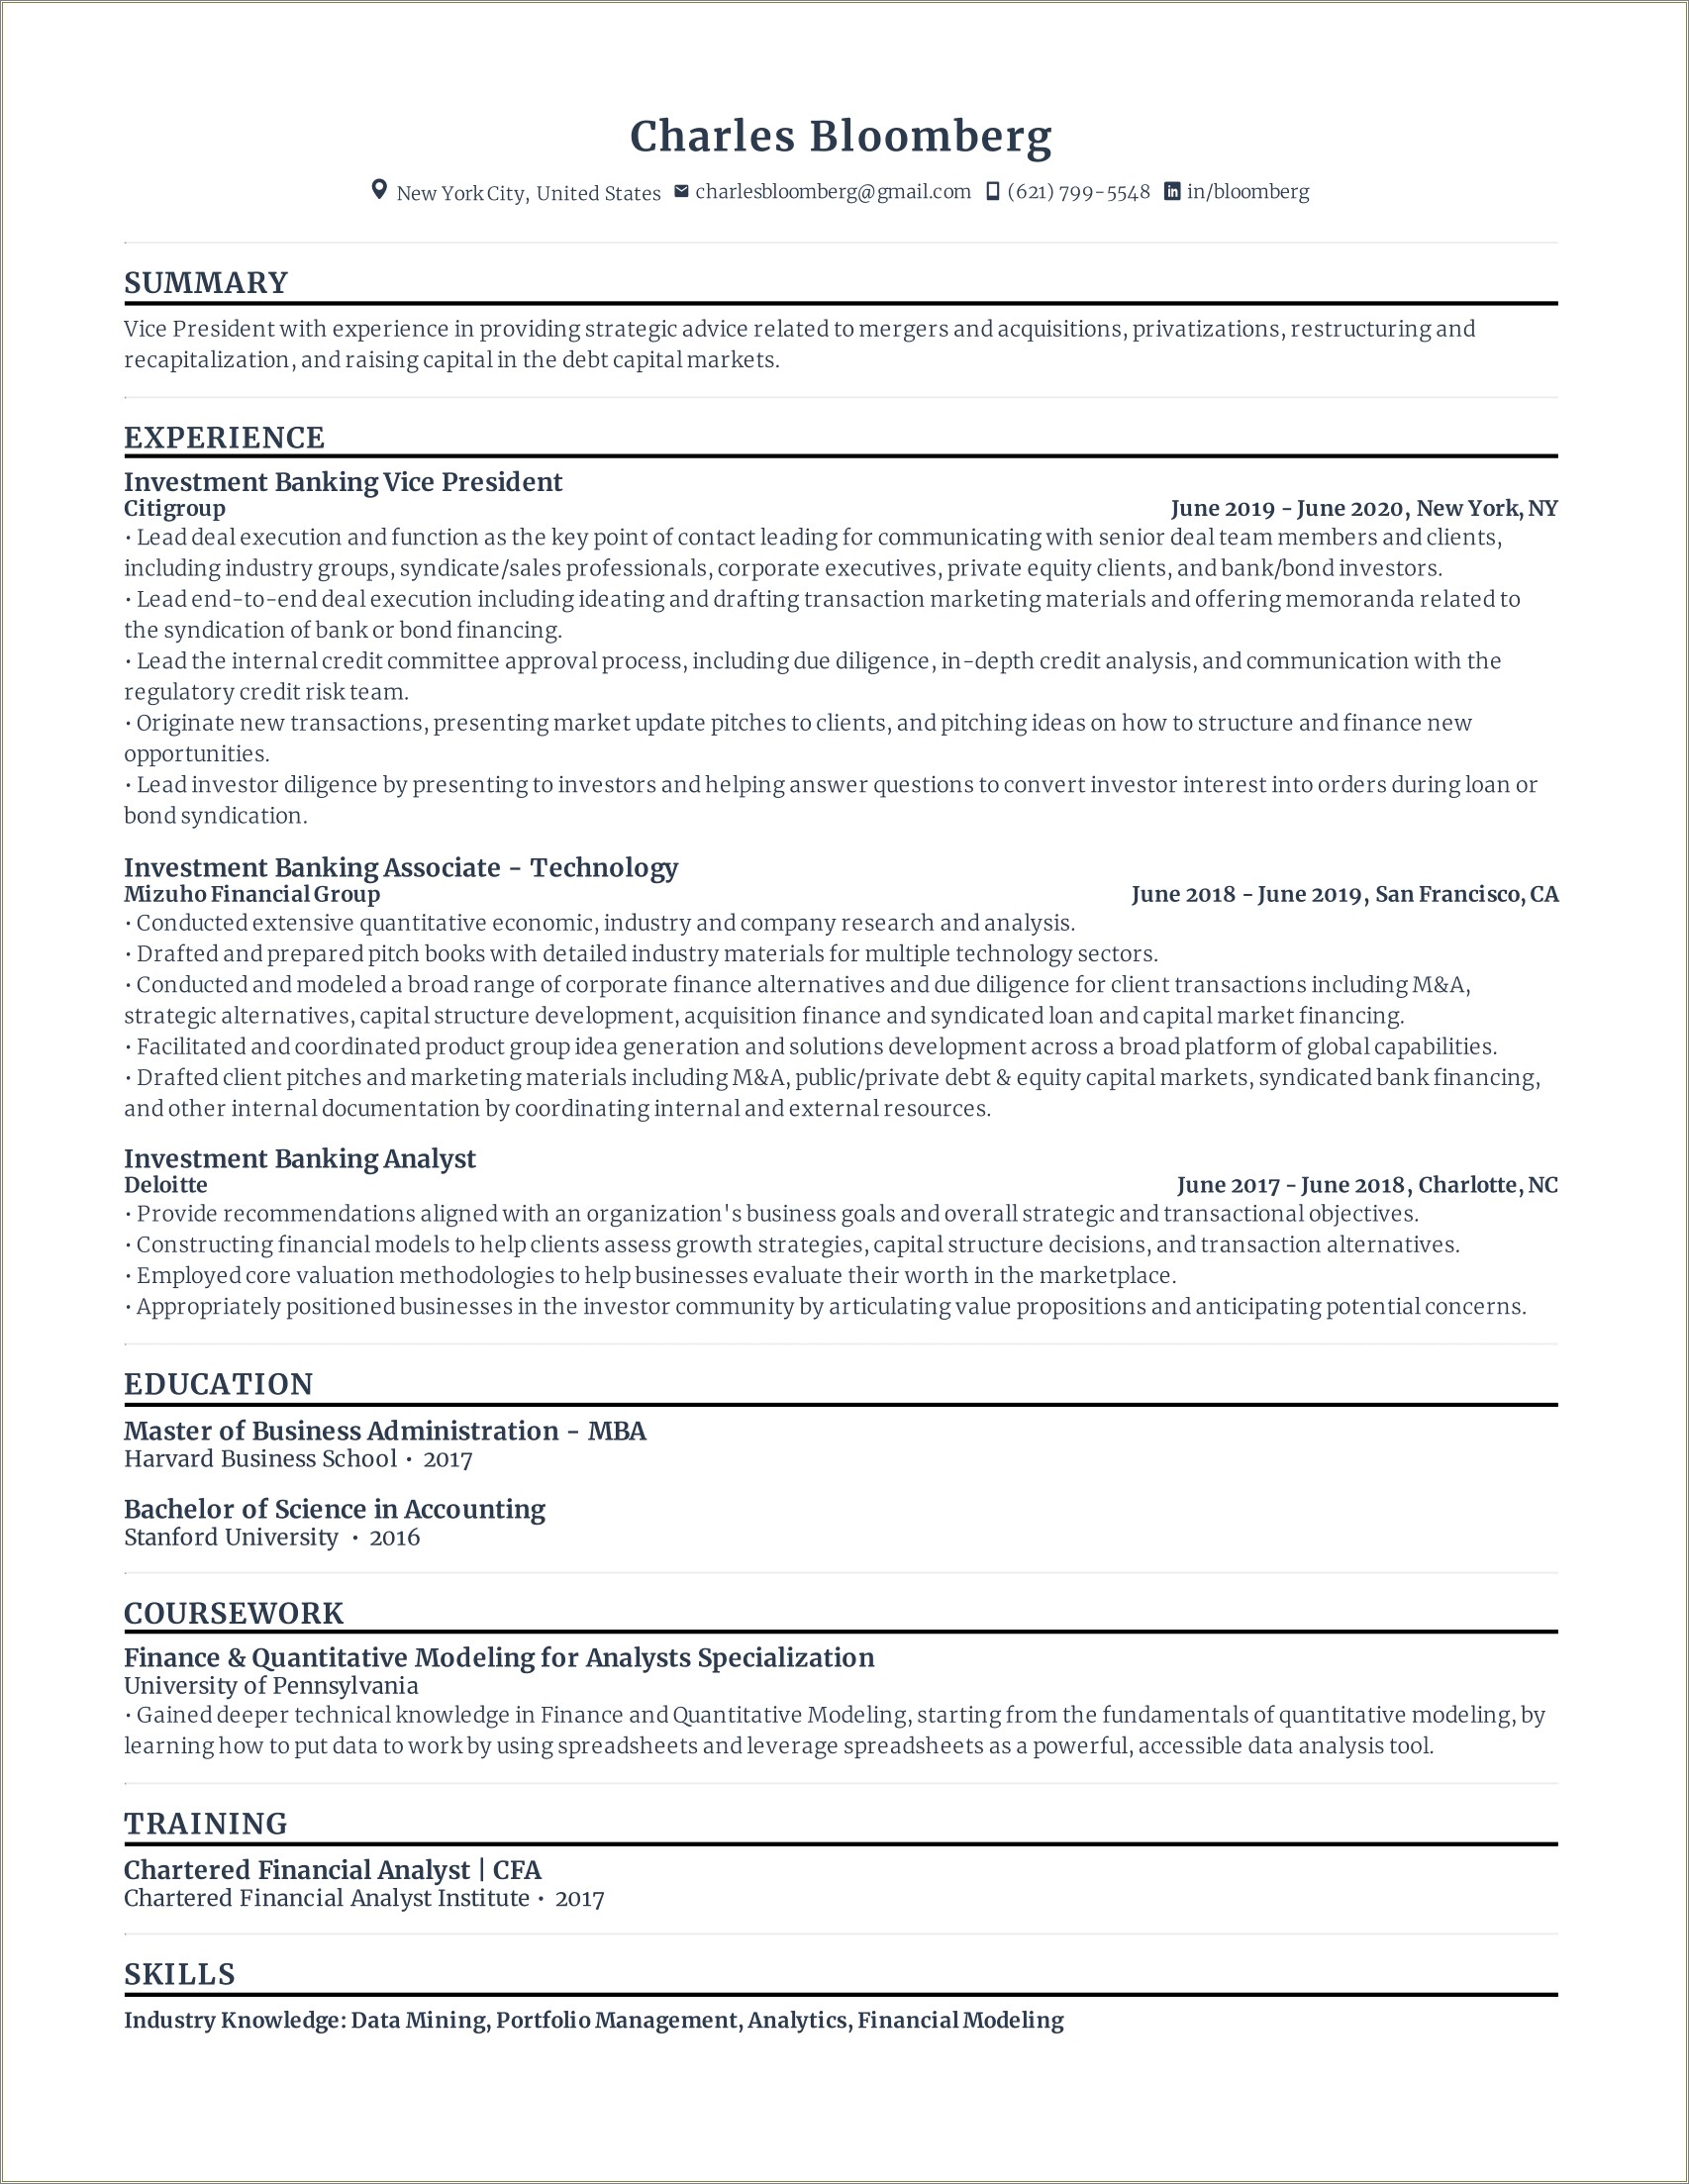 Where To Put Financial Modeling On Resume